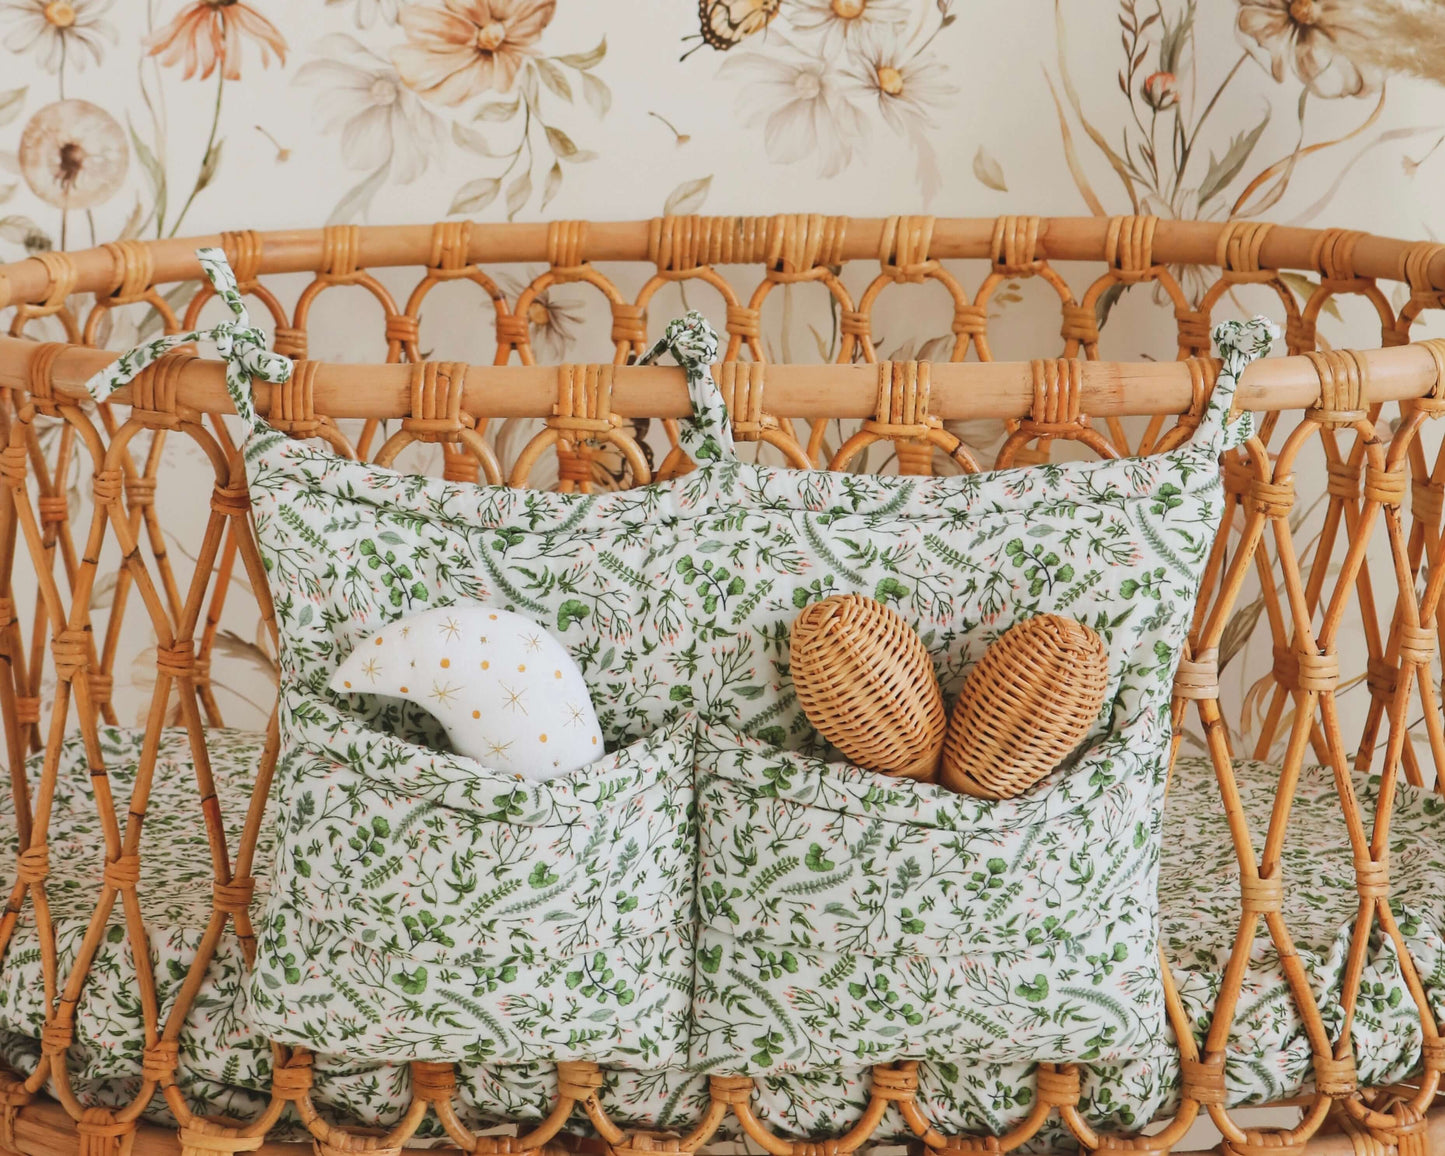 The little leaves - muslin bed pocket organizer